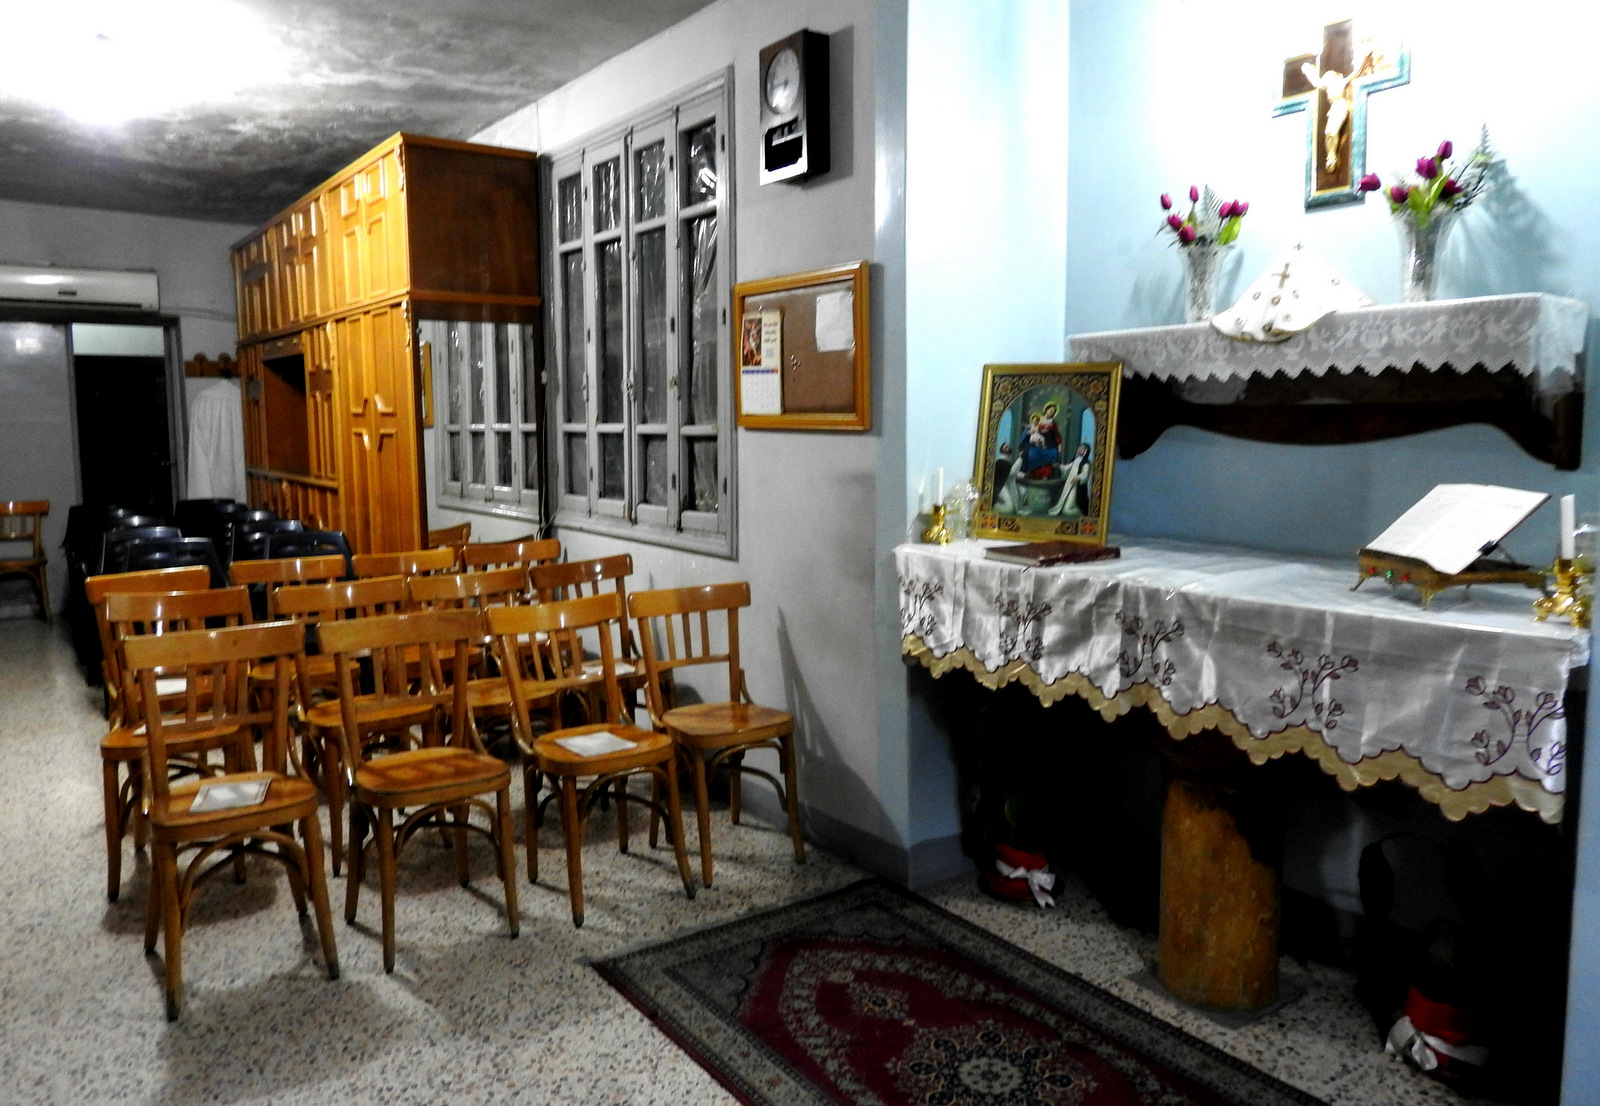 According to a representative of the Syrian Catholic Church of Aleppo, around one-third of the congregation’s 1,350 families have fled to other areas of Syria or even gone abroad, primarily seeking security and distance from the mortars and rockets of terrorist factions. Congregation members stopped worshiping in the church chapel two years ago after repeated instances of shelling. They now gather in a small interior corridor where they feel somewhat safer. Nov. 2, 2016. (Photo: Eva Bartlett)